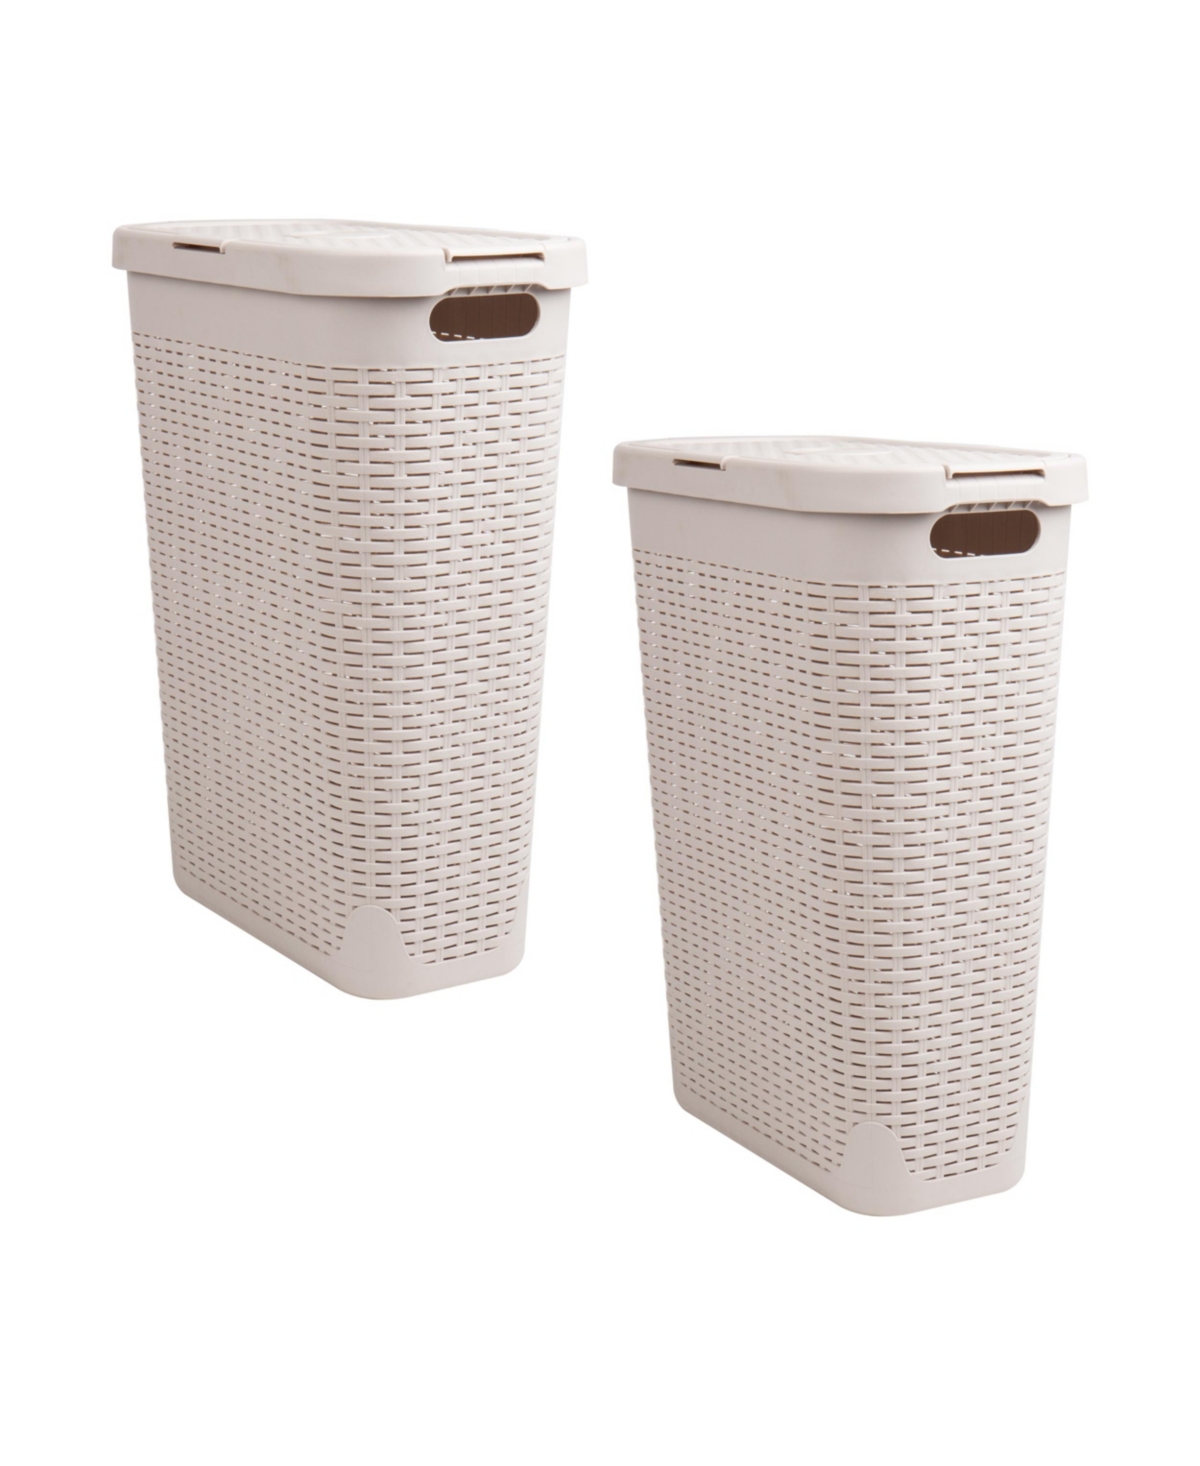 Mind Reader Basket Collection, Slim Laundry Hamper, 40 Liter 15kg, 33lbs Capacity, Cut Out Handles, Attached Hin In Ivory